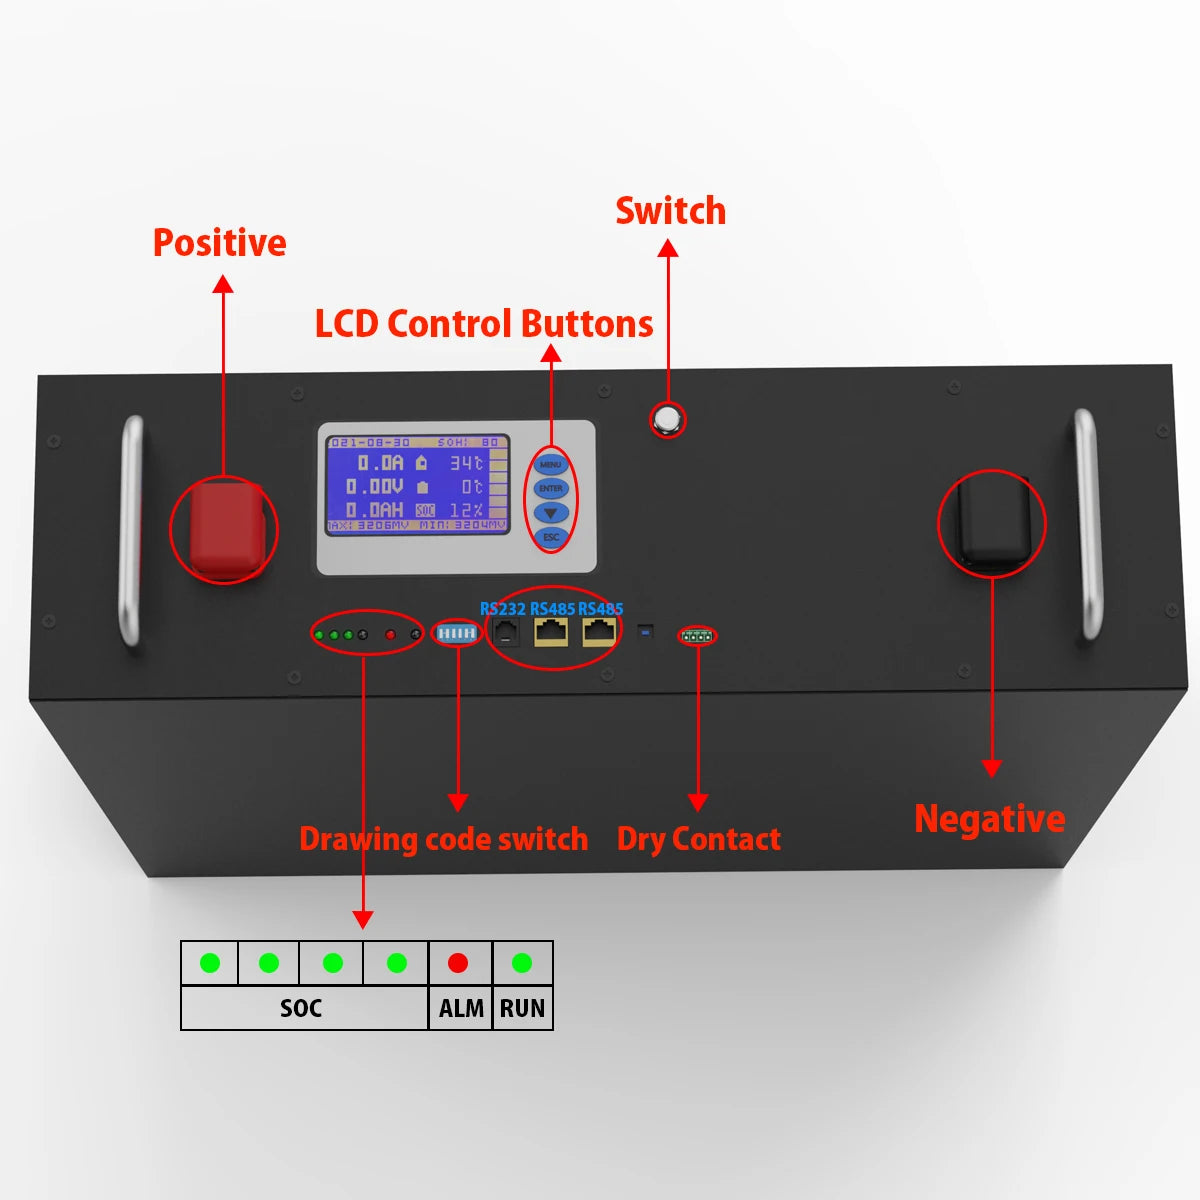 Monitor battery state, alarms, and run status with LCD display and control buttons via RS485 protocol.